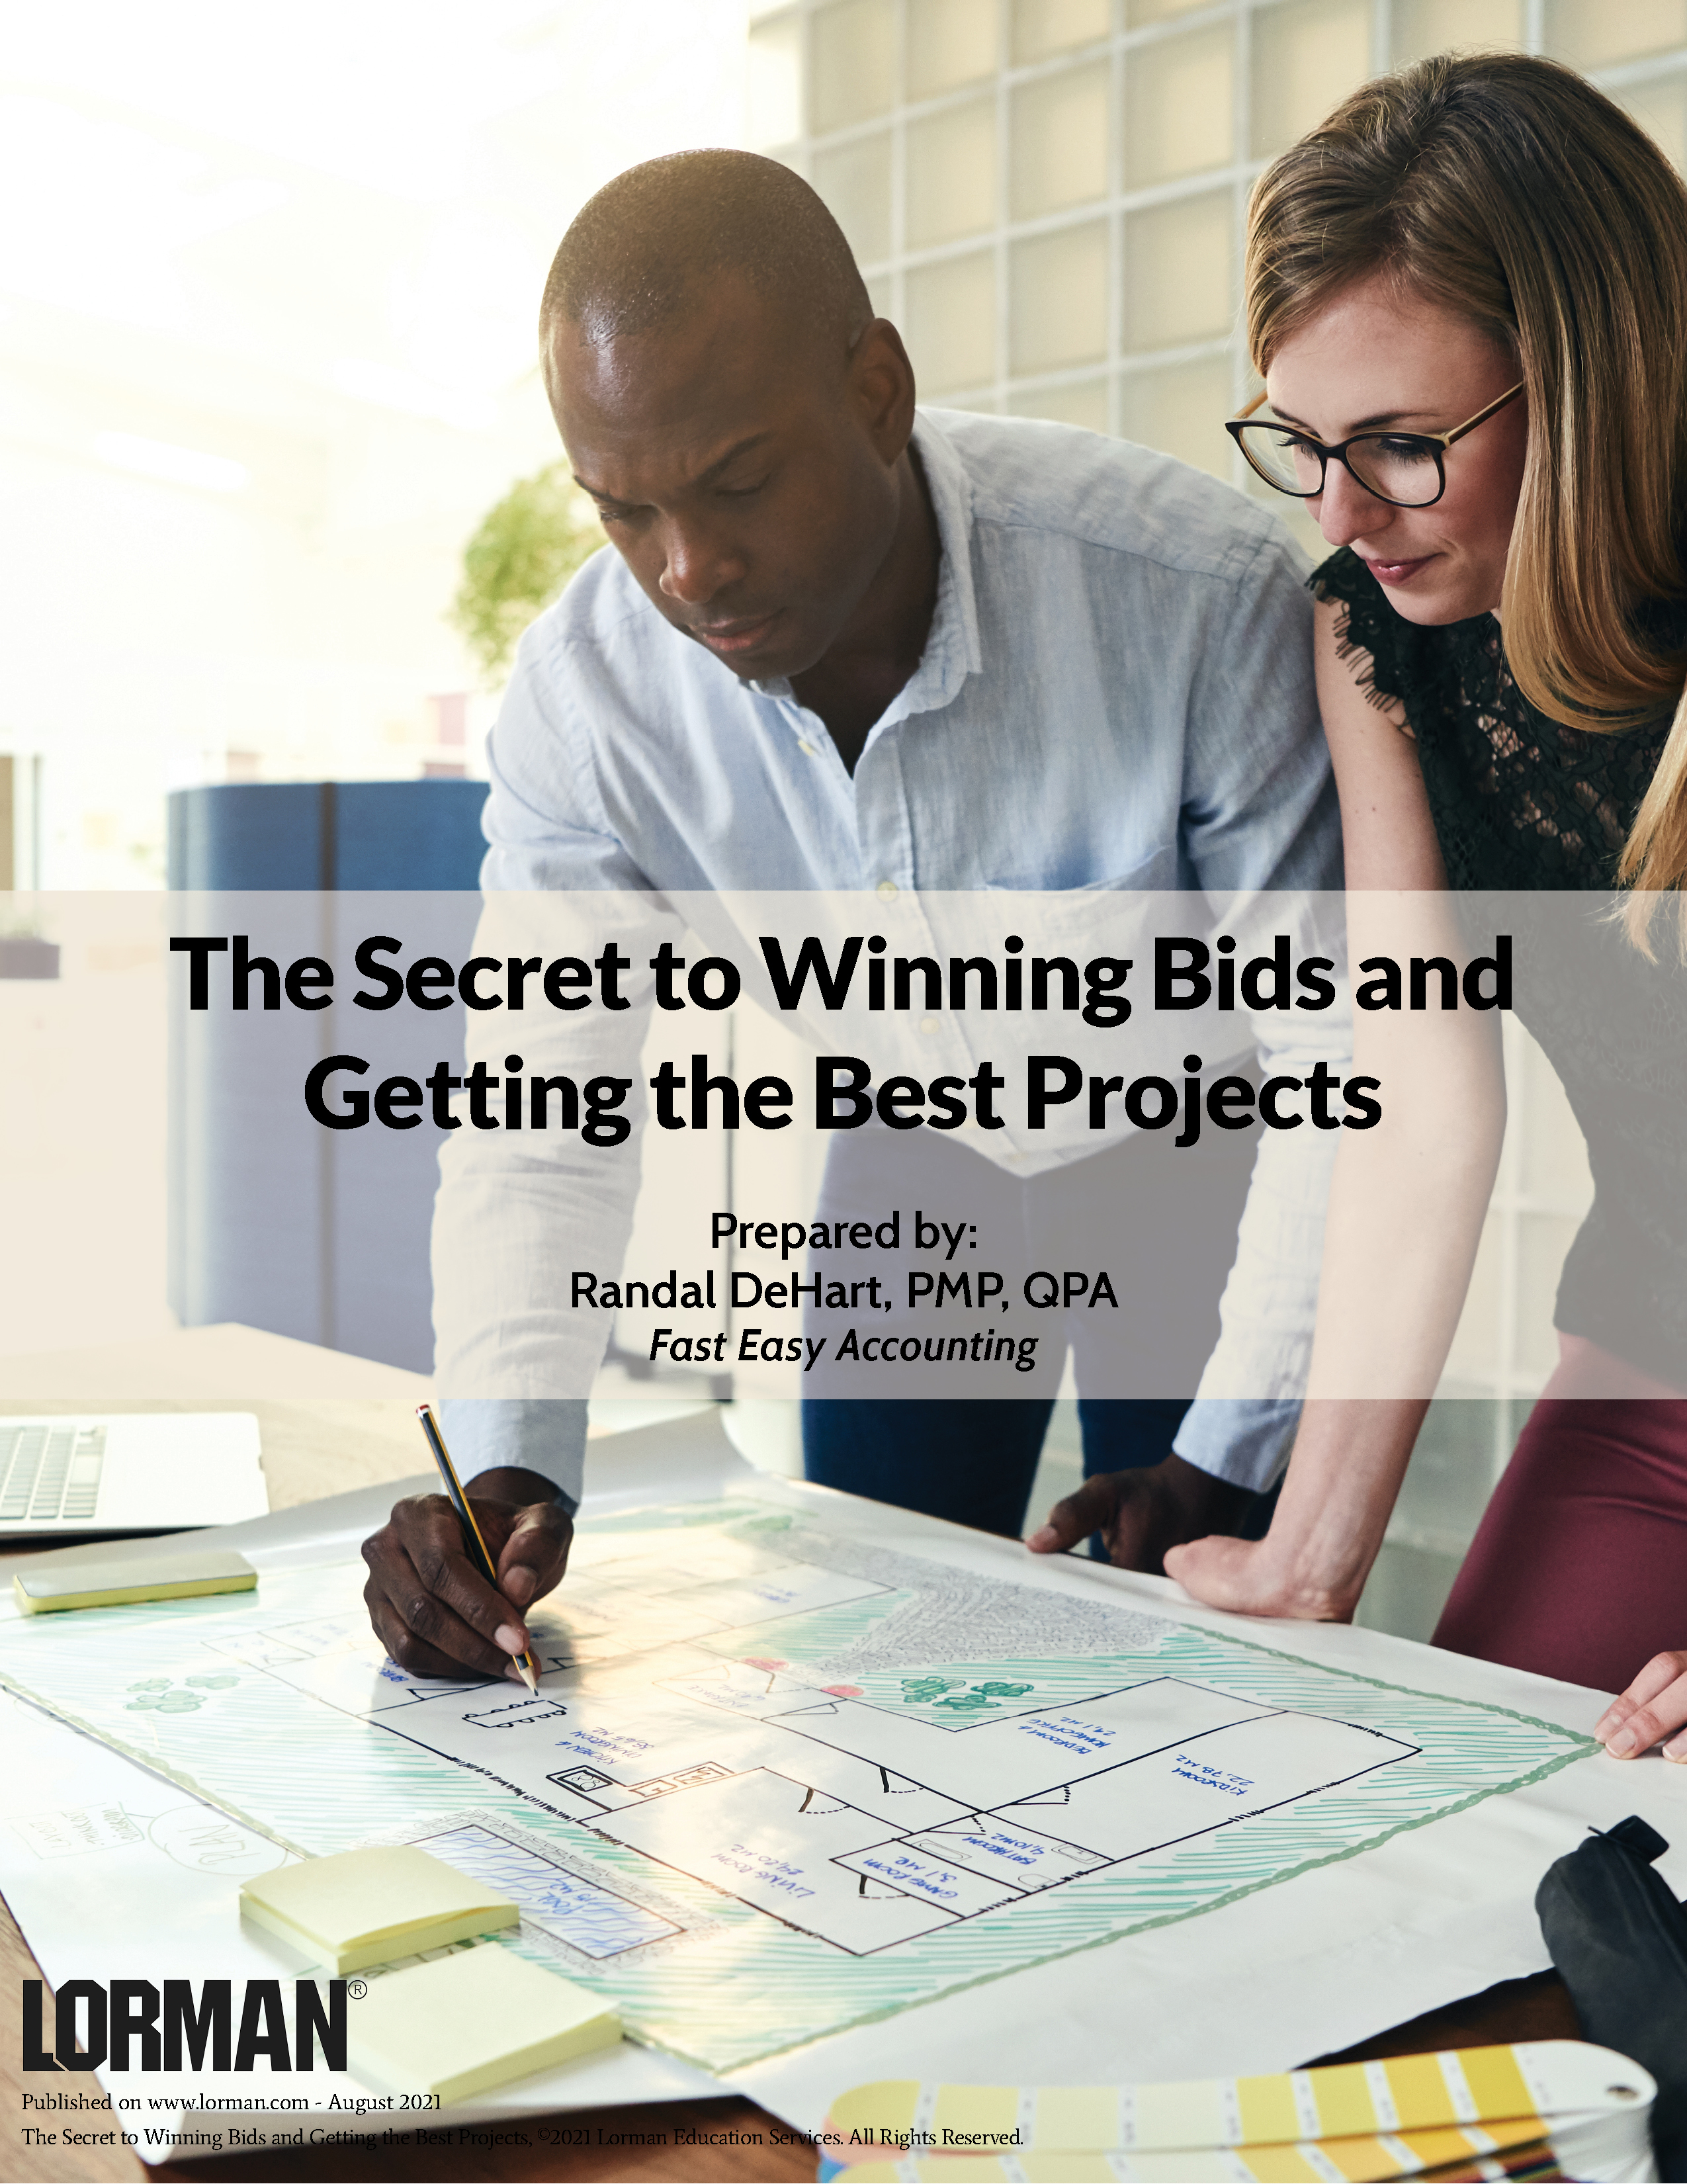 The Secret to Winning Bids and Getting the Best Projects